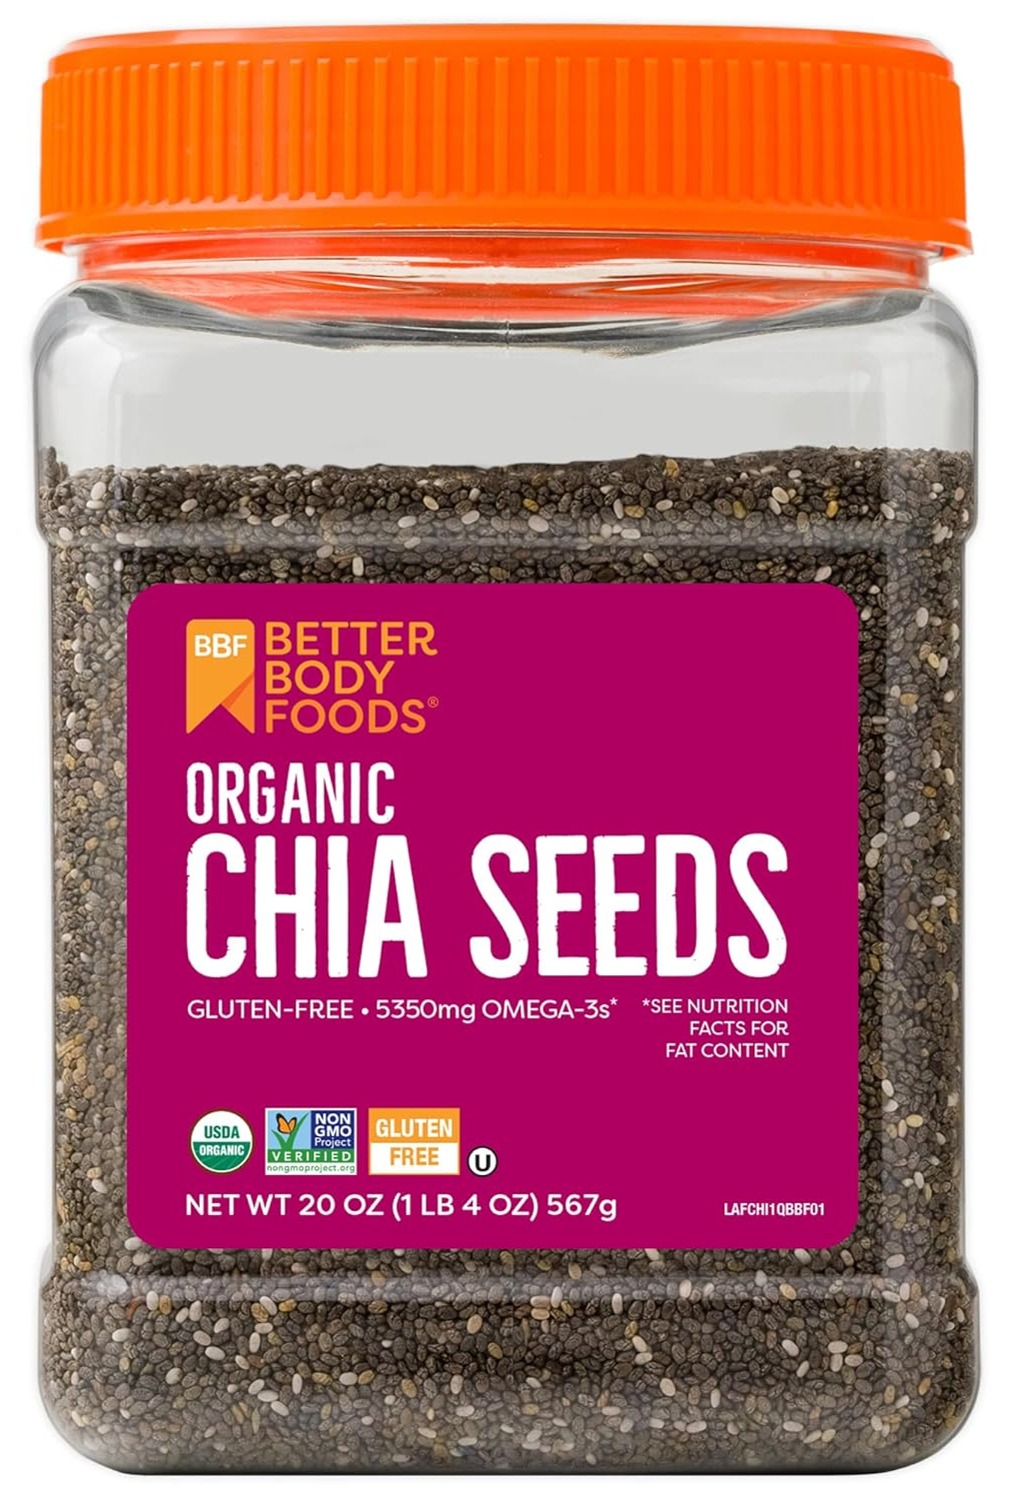 [S&S] $6.74: 20-Oz BetterBody Foods Organic Chia Seeds at Amazon